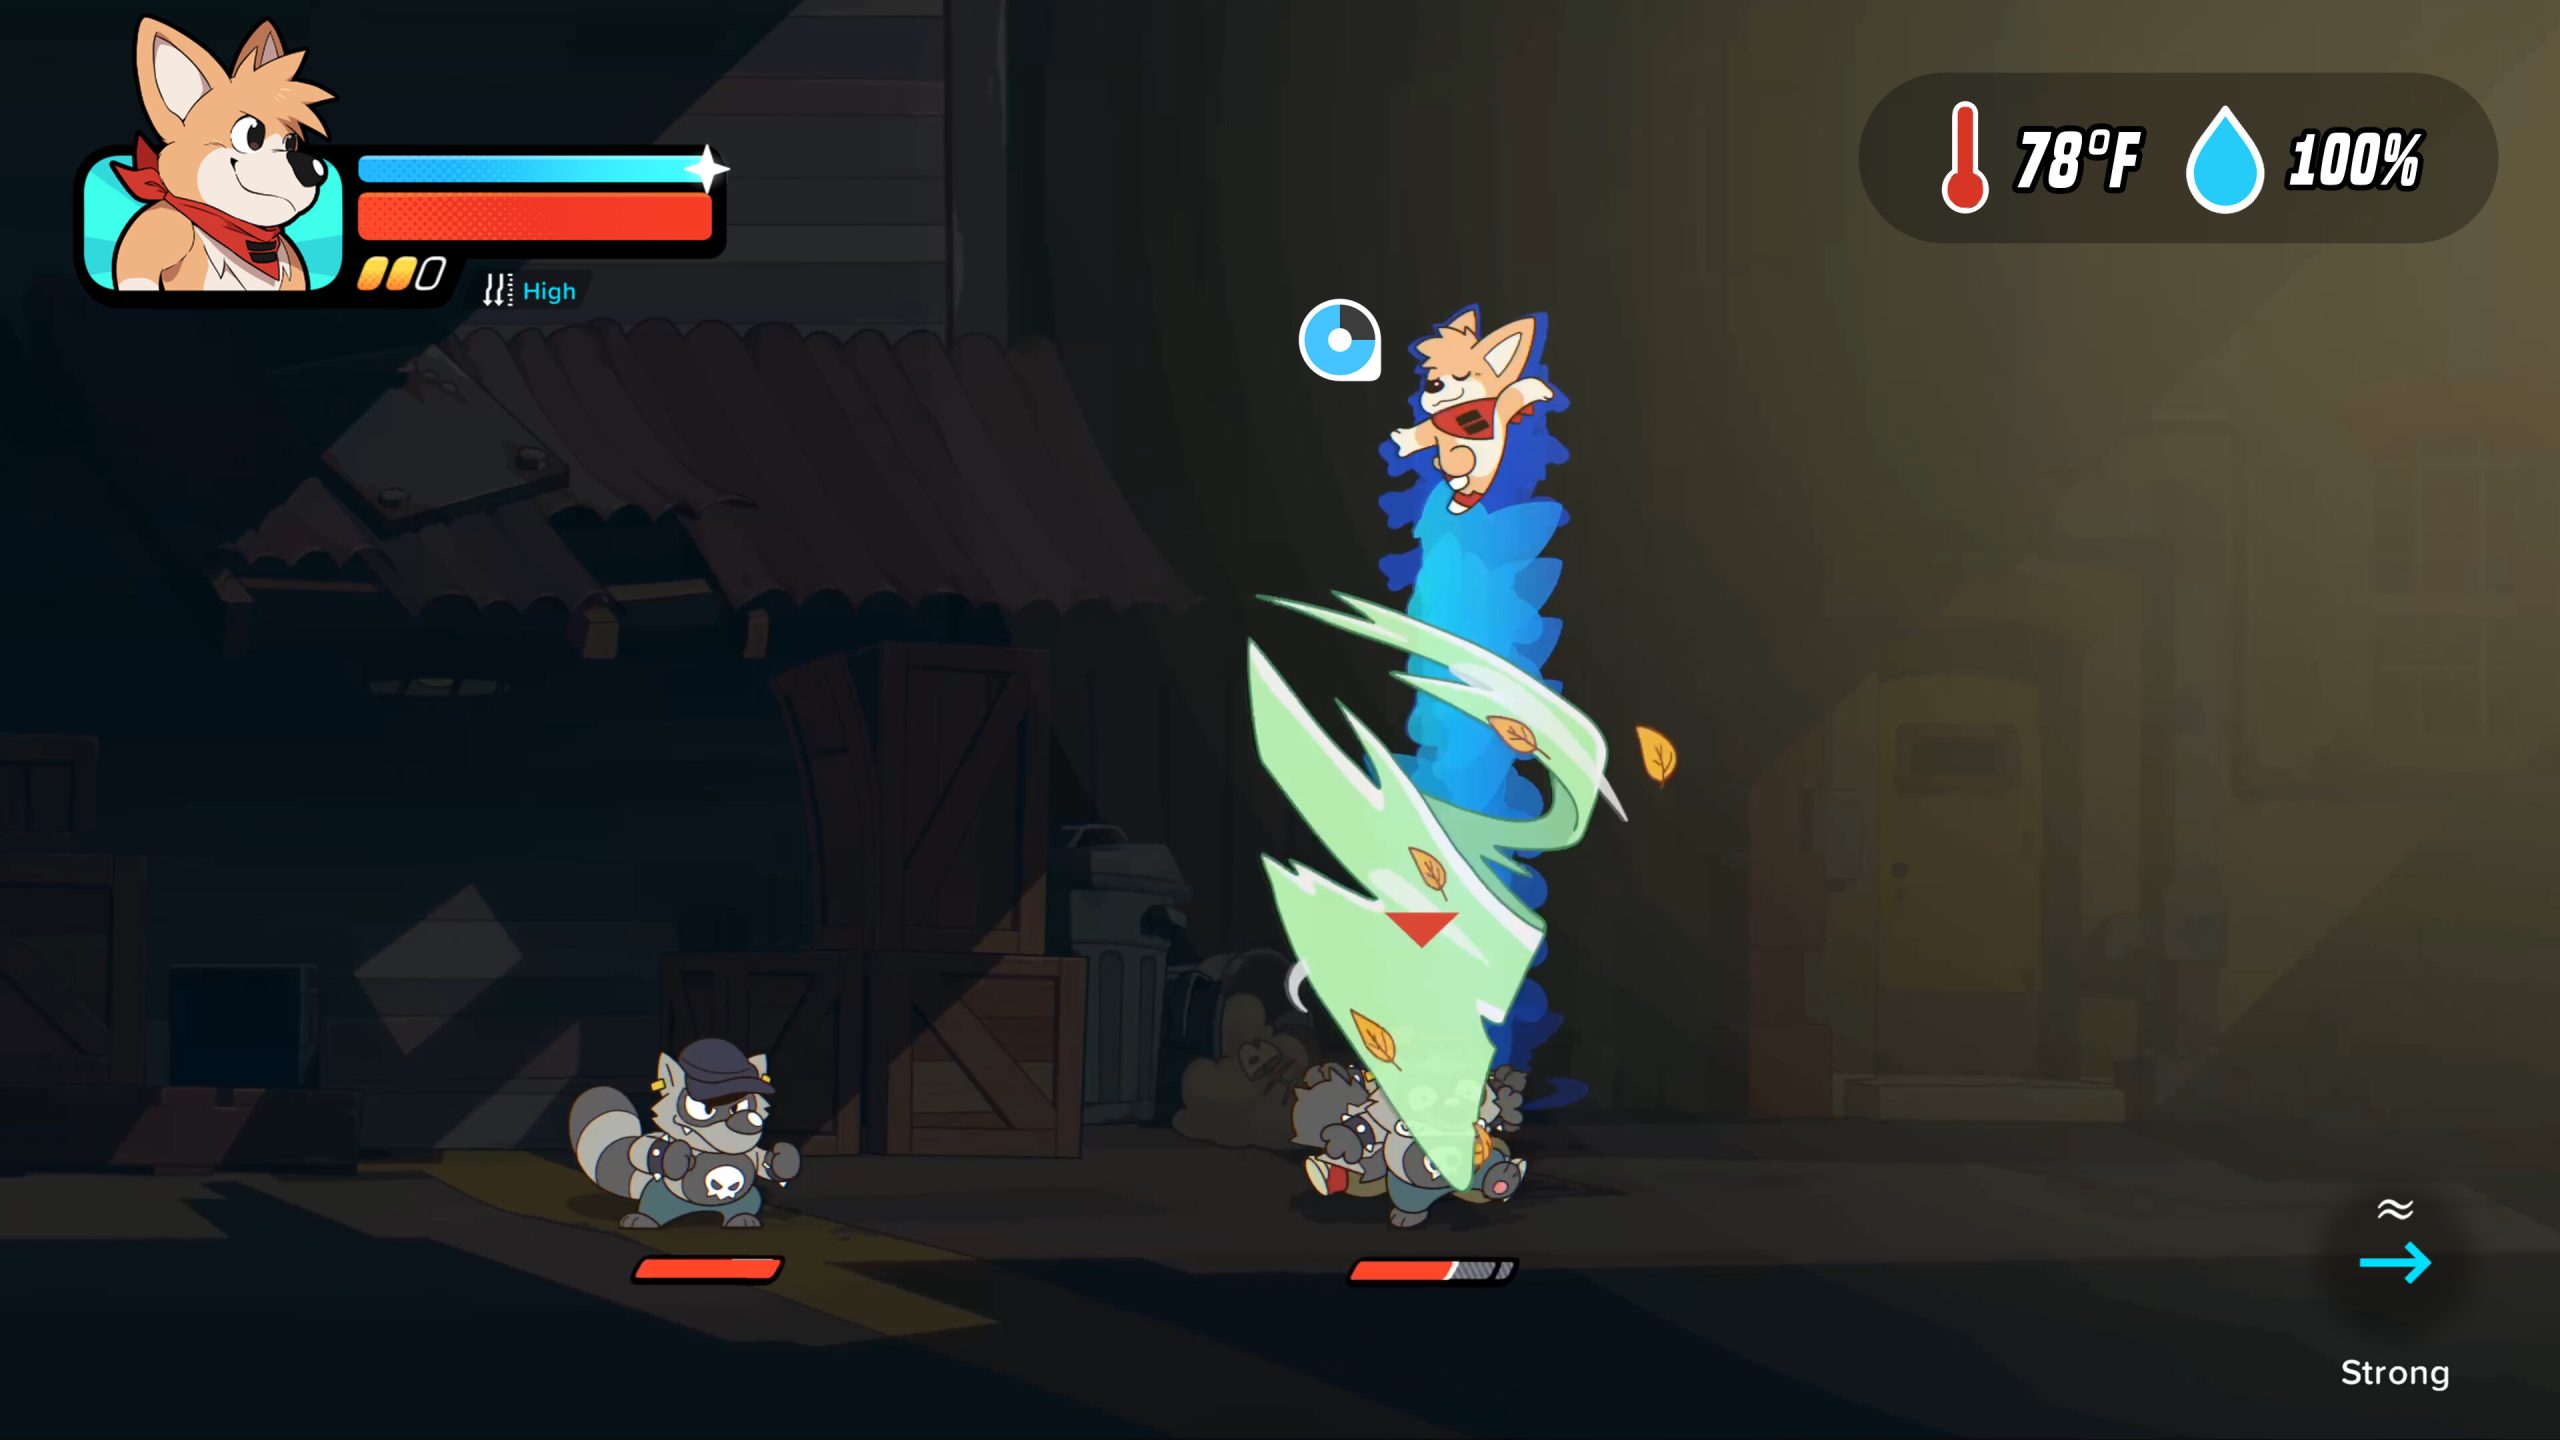 A screenshot from Breeze in the Clouds. A small beige corgi is on top of a tornado, with two enemies at the bottom.